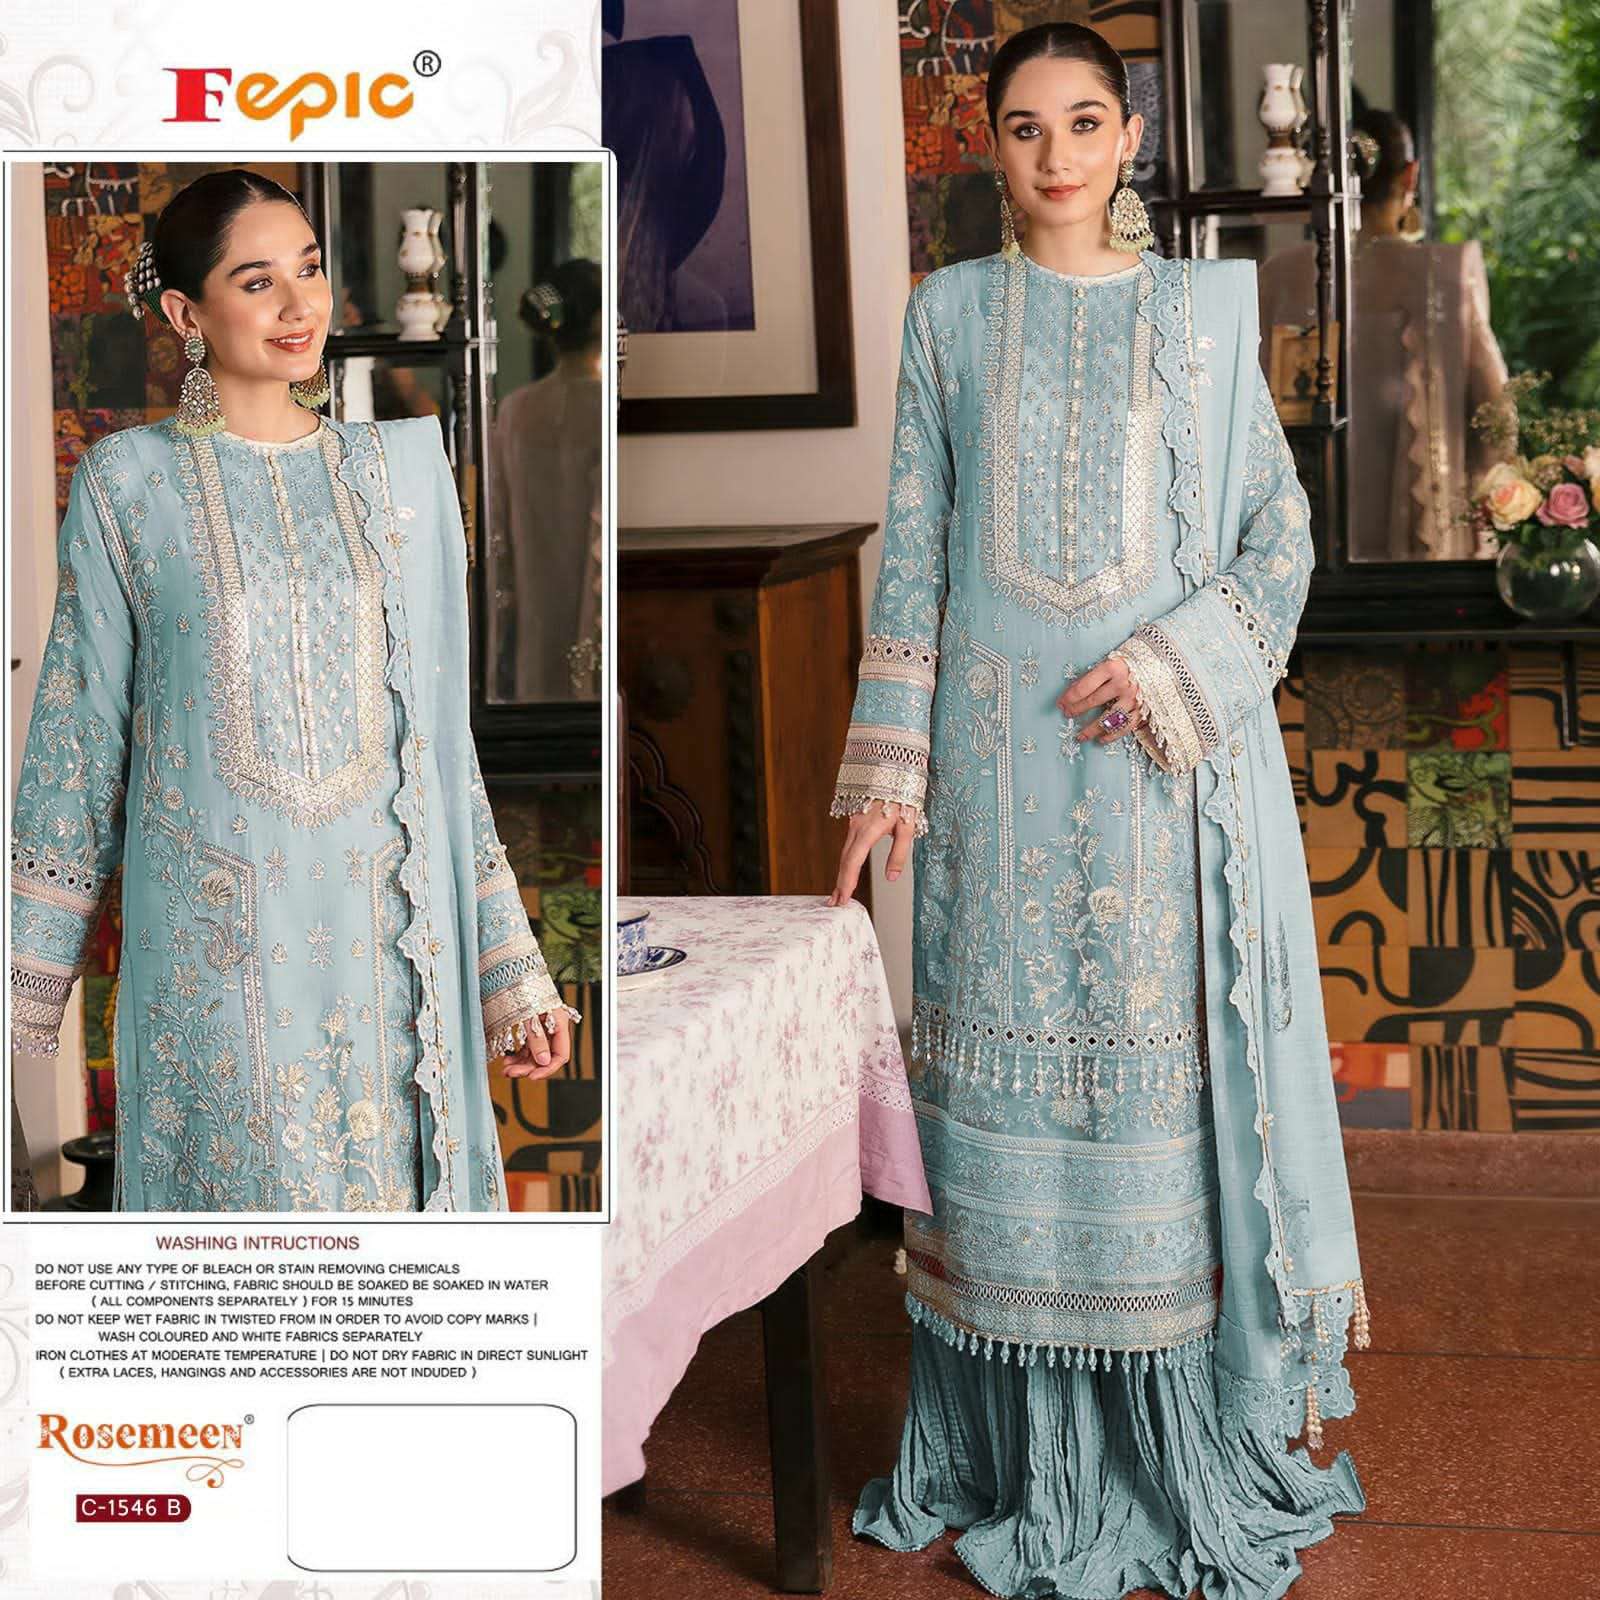 FEPIC ROSEMEEN D NO.C 1546 DESIGNER ORGANZA EMBROIDERY WORK WITH HEAVY PAKISTANI REPLICA SUITS WHOLESALE 